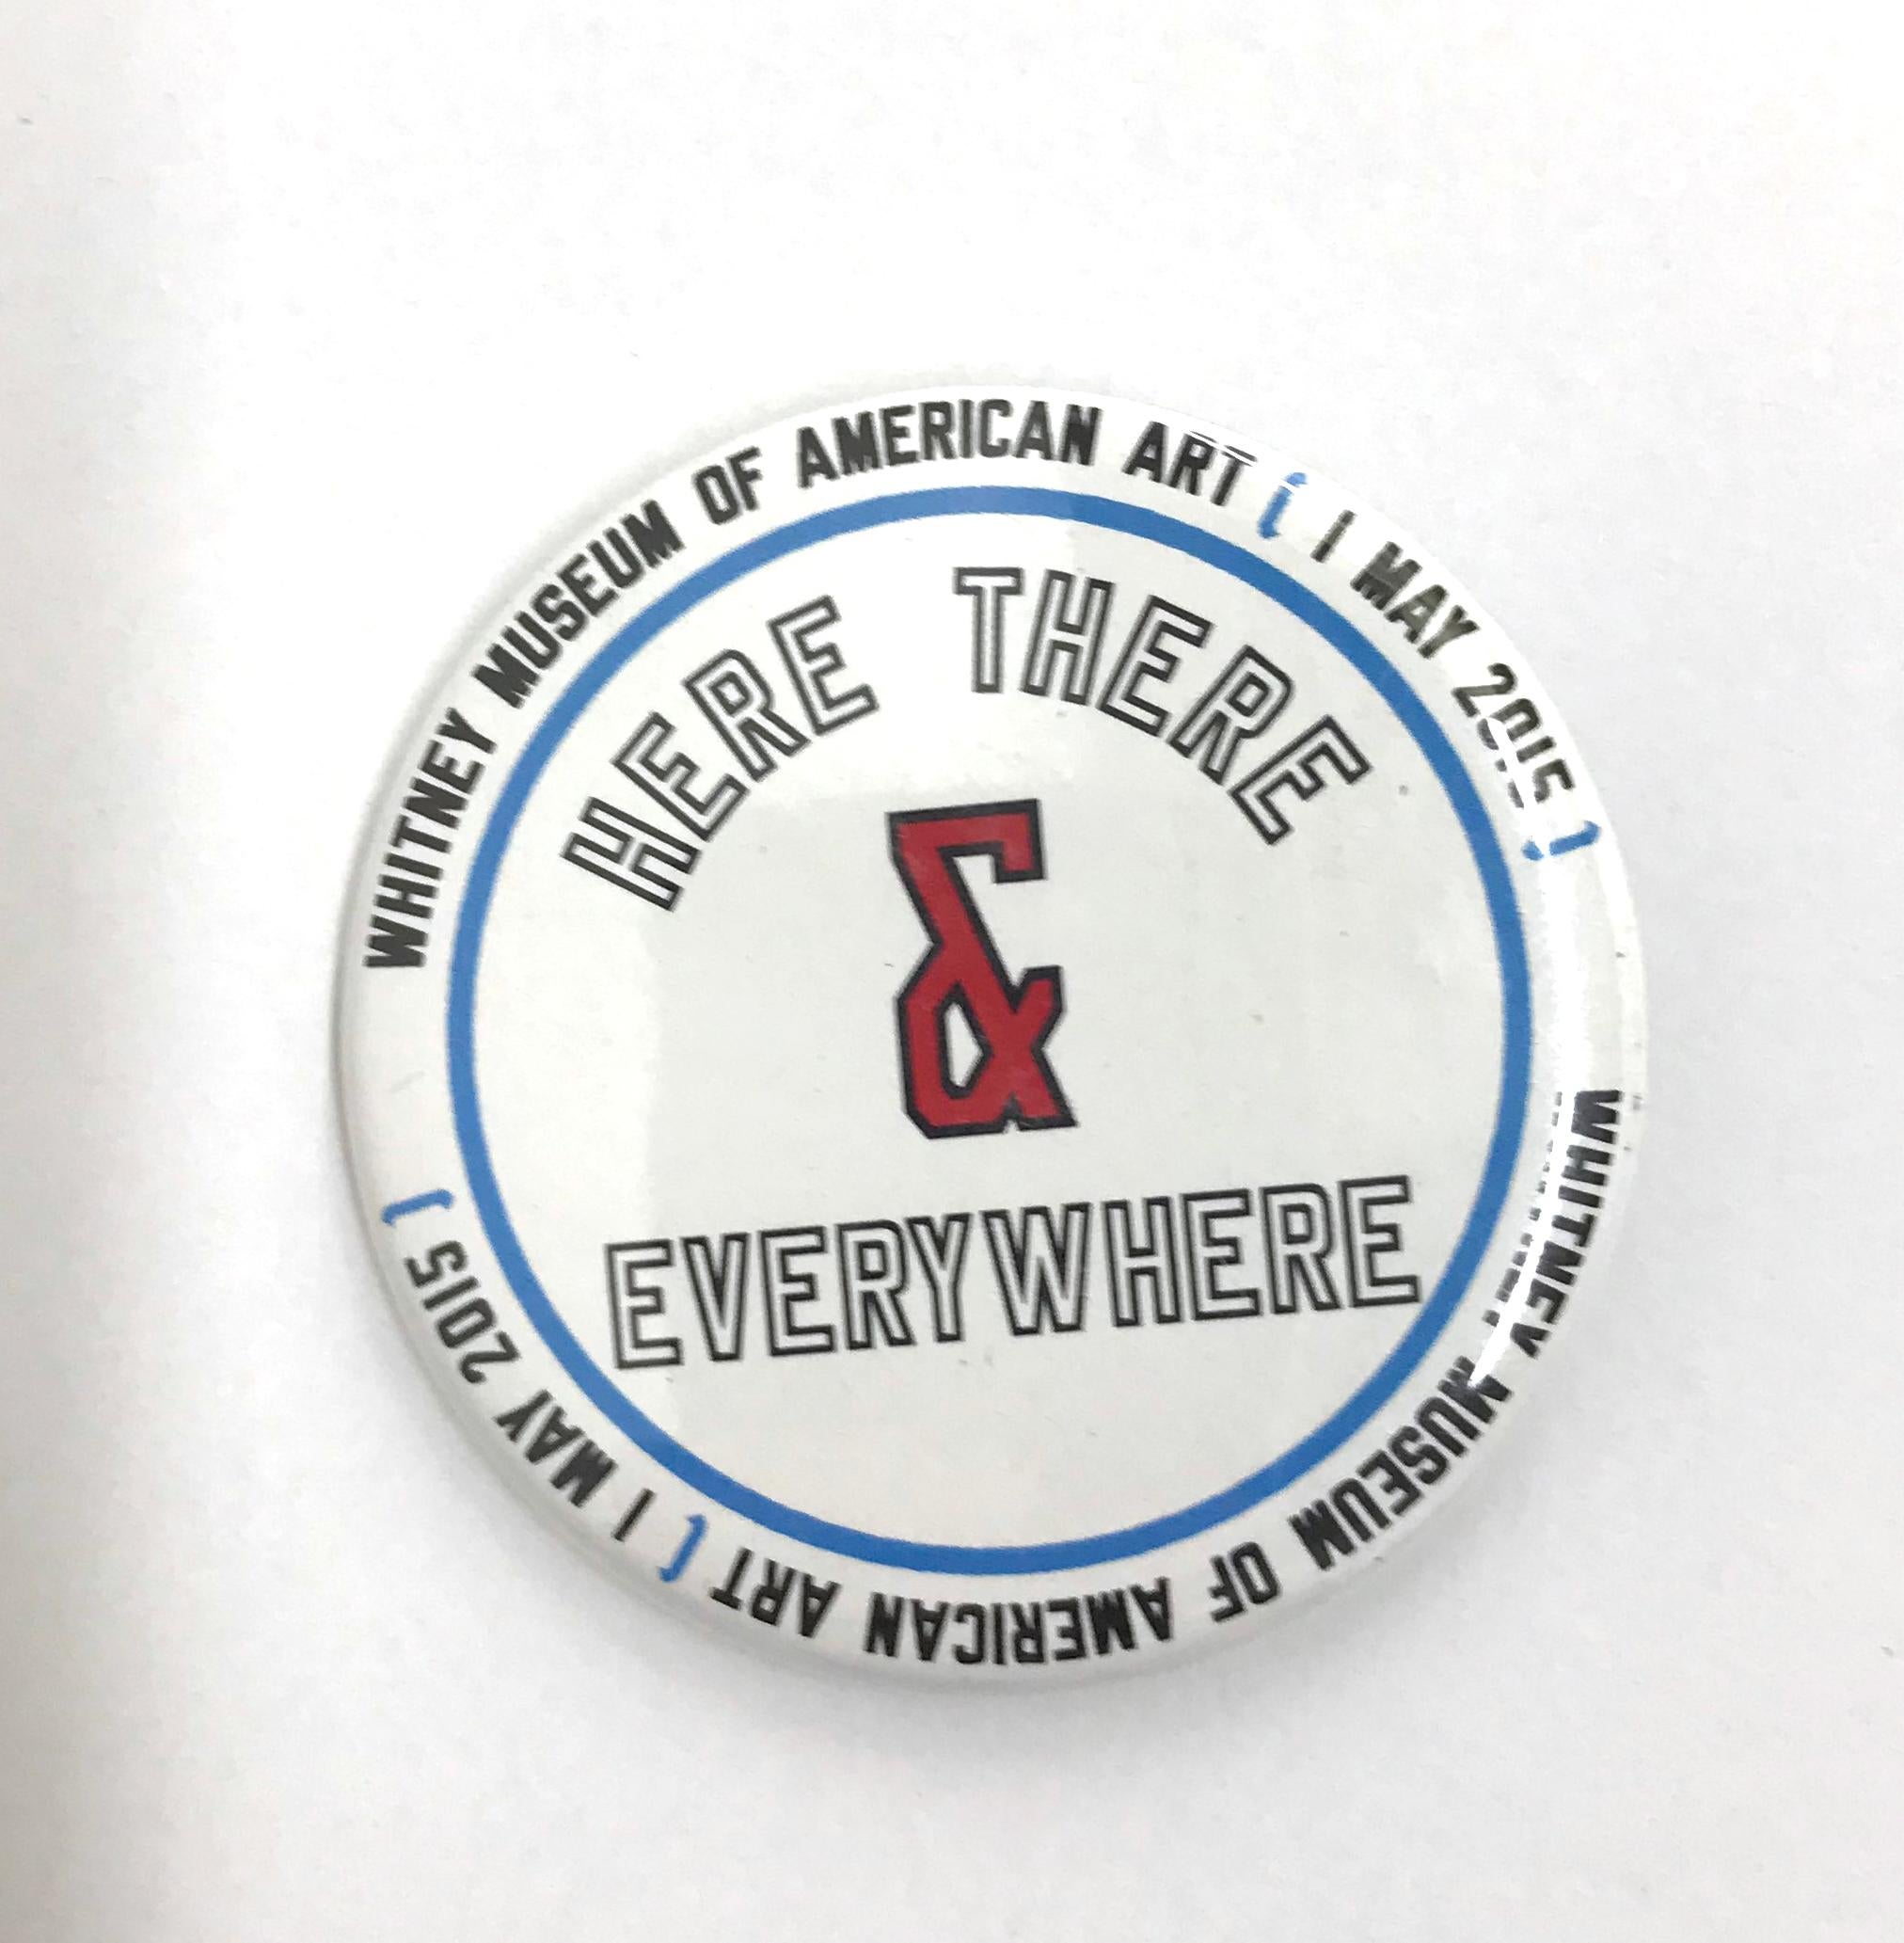 Lawrence Weiner 
HERE THERE & EVERYWHERE, 2015 

Produced for the opening of the new Whitney Museum of American Art in New York City, 01 May 2015. The button measures 2 1/8 inches (54 mm) in diameter and has 